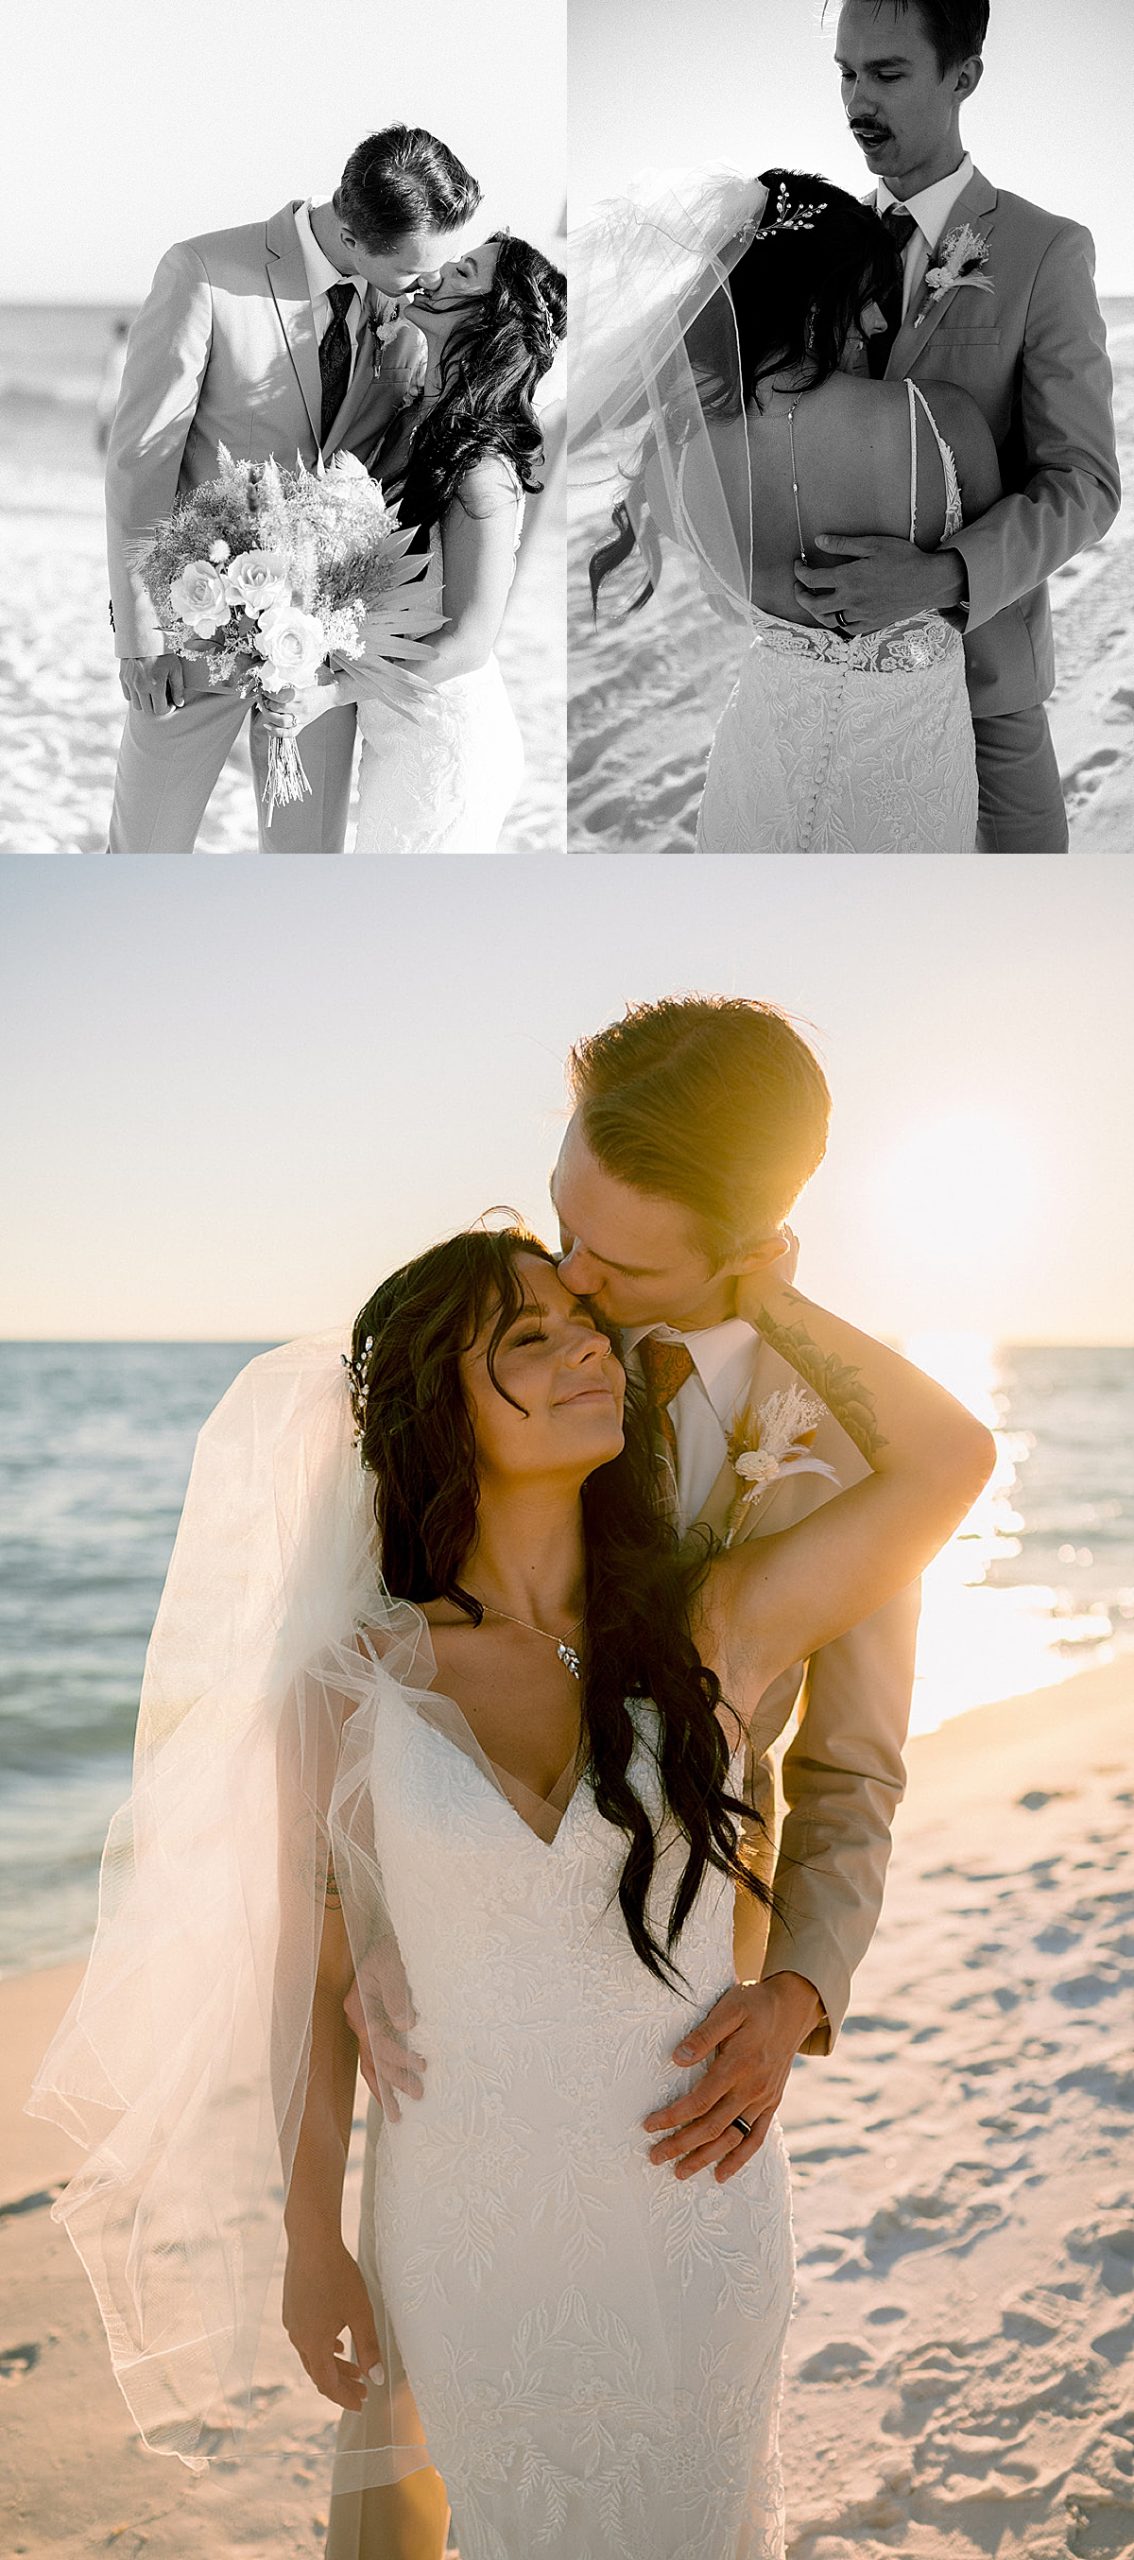 newly married couple on the beach at sunset by Emily burns photo